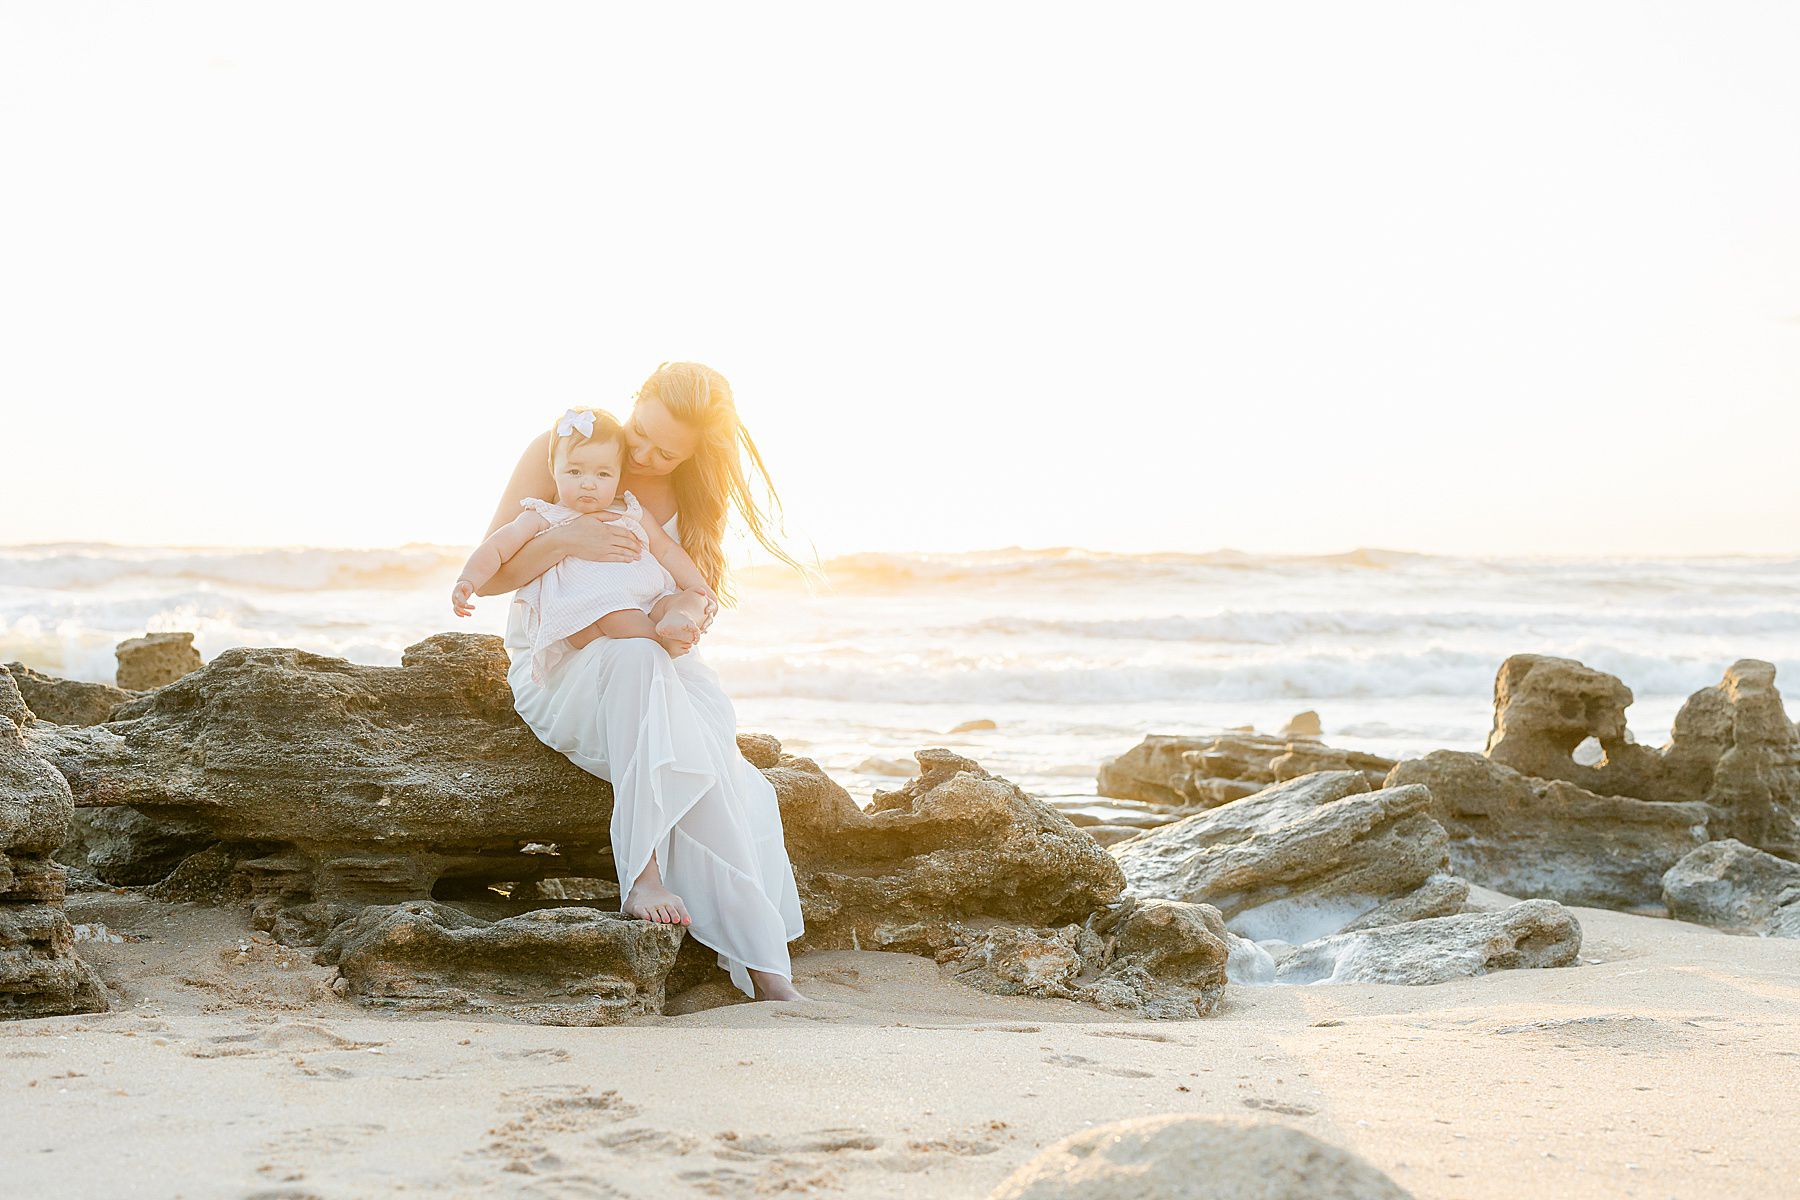 woman with long blond hair in long white dress holding baby girl on the rocks at the beach at sunrise